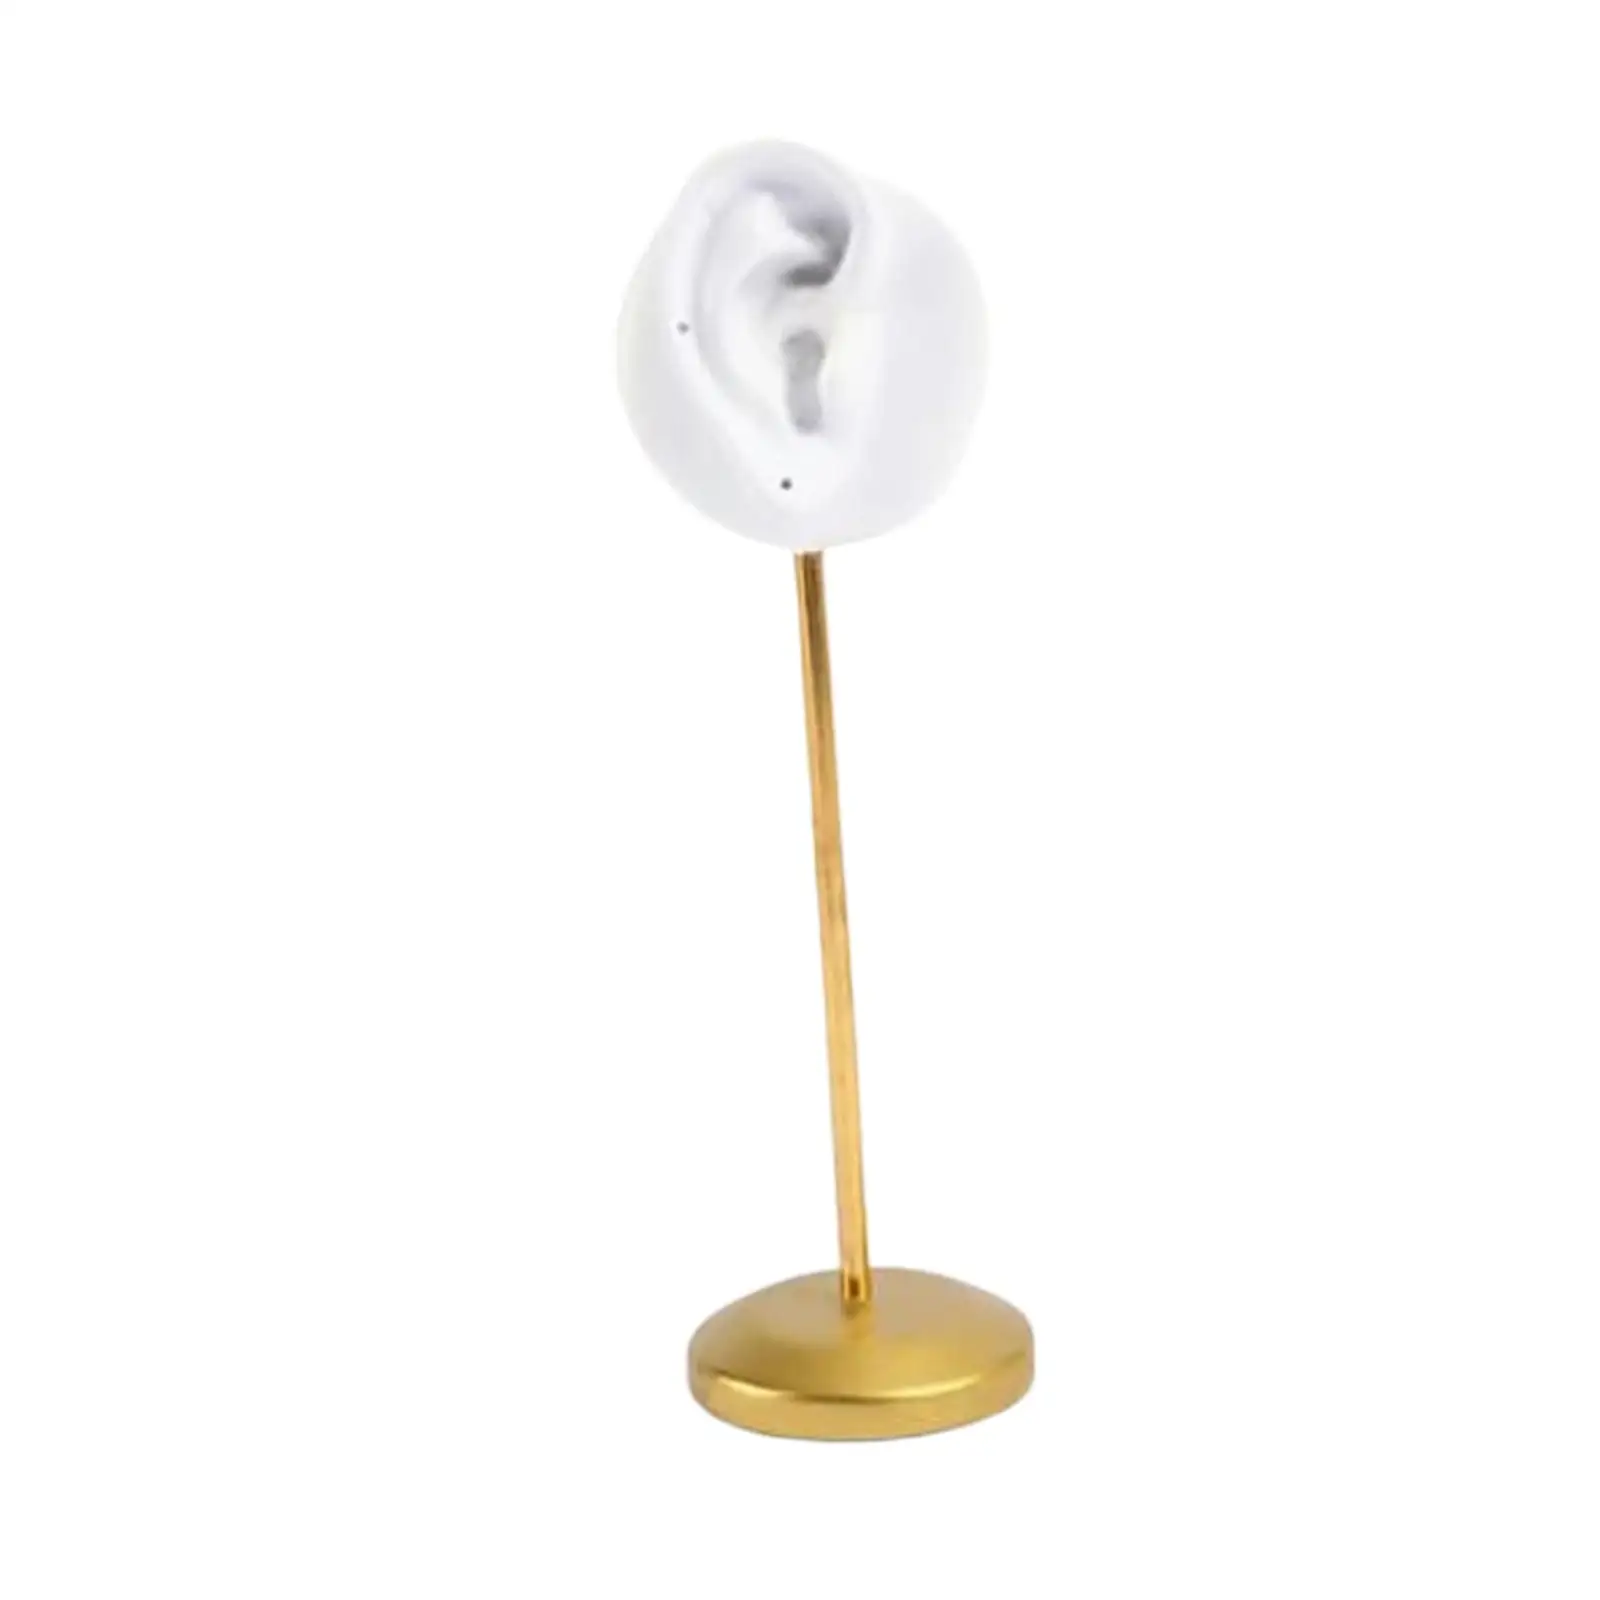 Earring Display Stand Round Base Gifts White for Dresser Desktop Collection